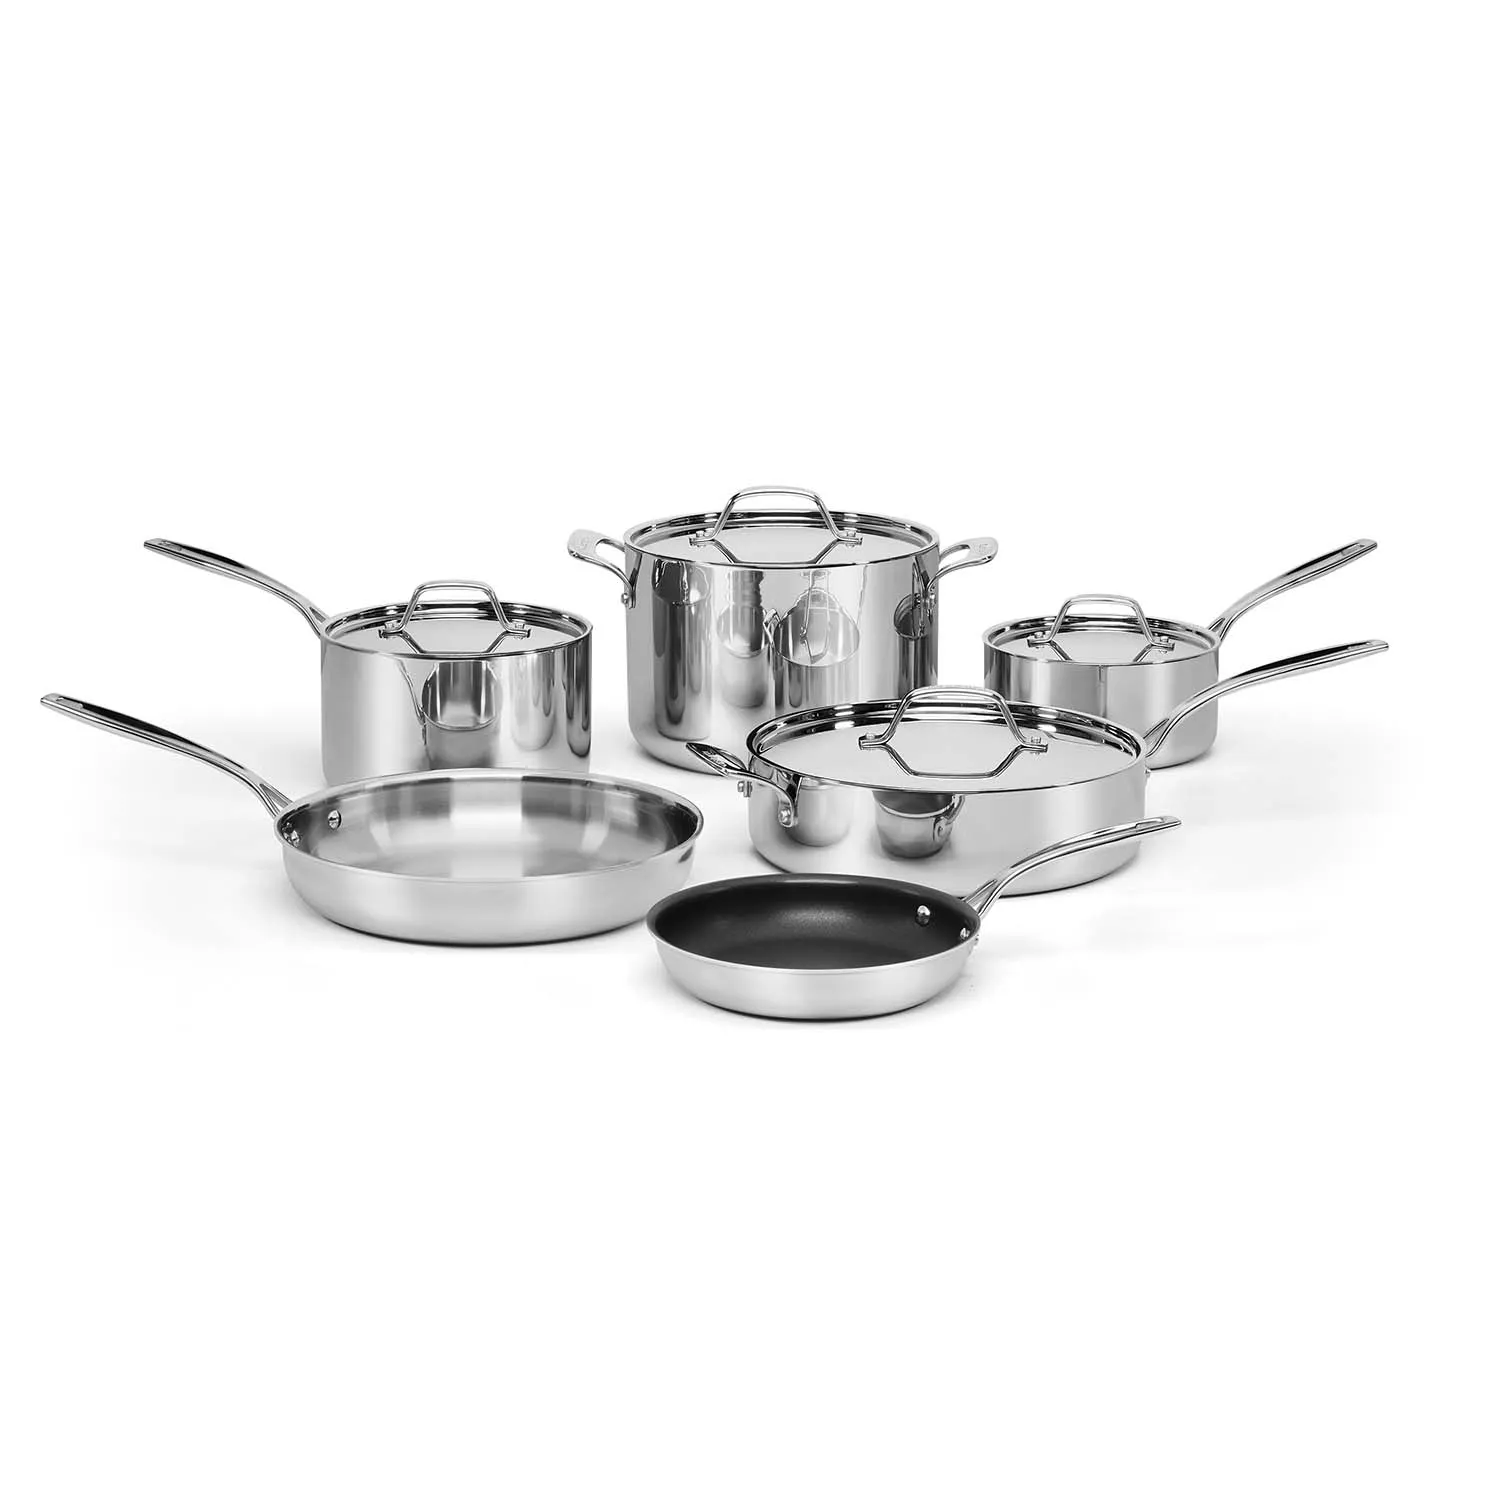 10-Piece Chef's Classic Stainless Cookware Set - Cuisinart